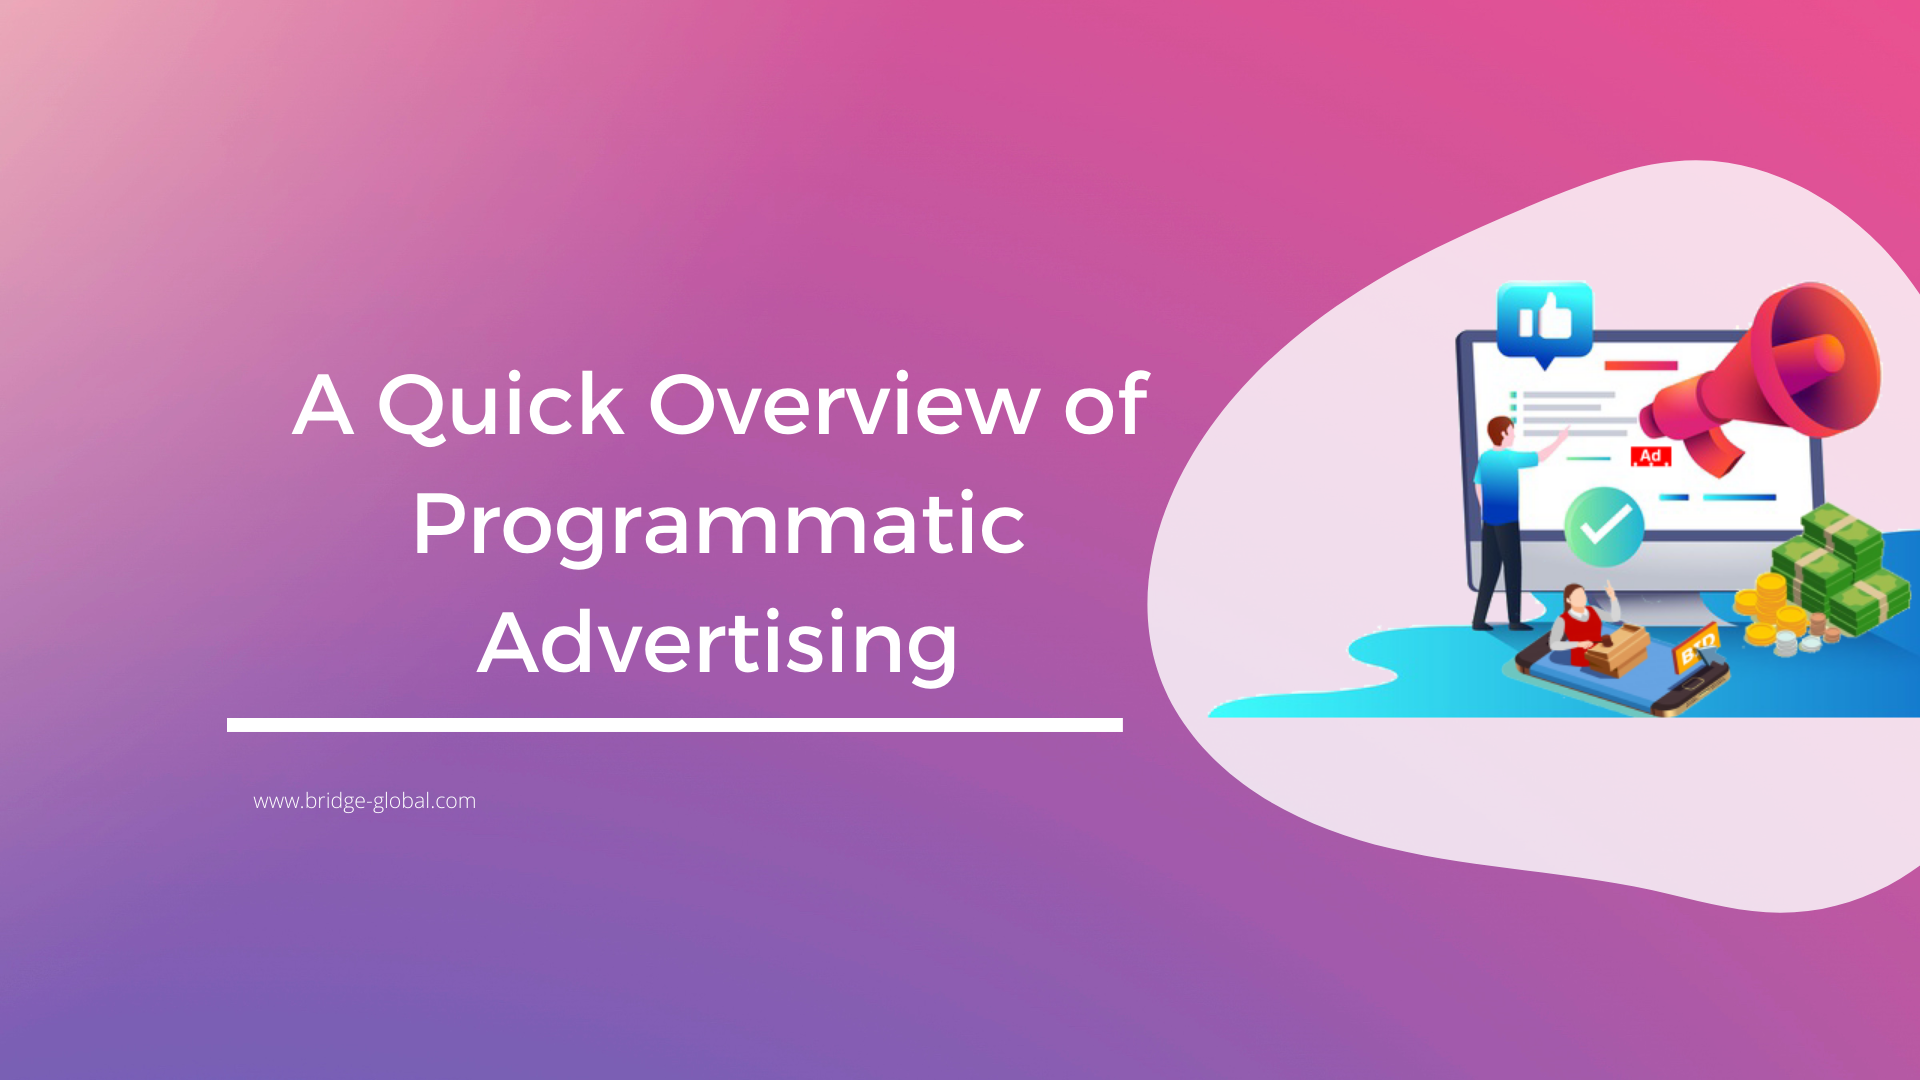 Everything A Beginner Wants to Know About Programmatic Advertising